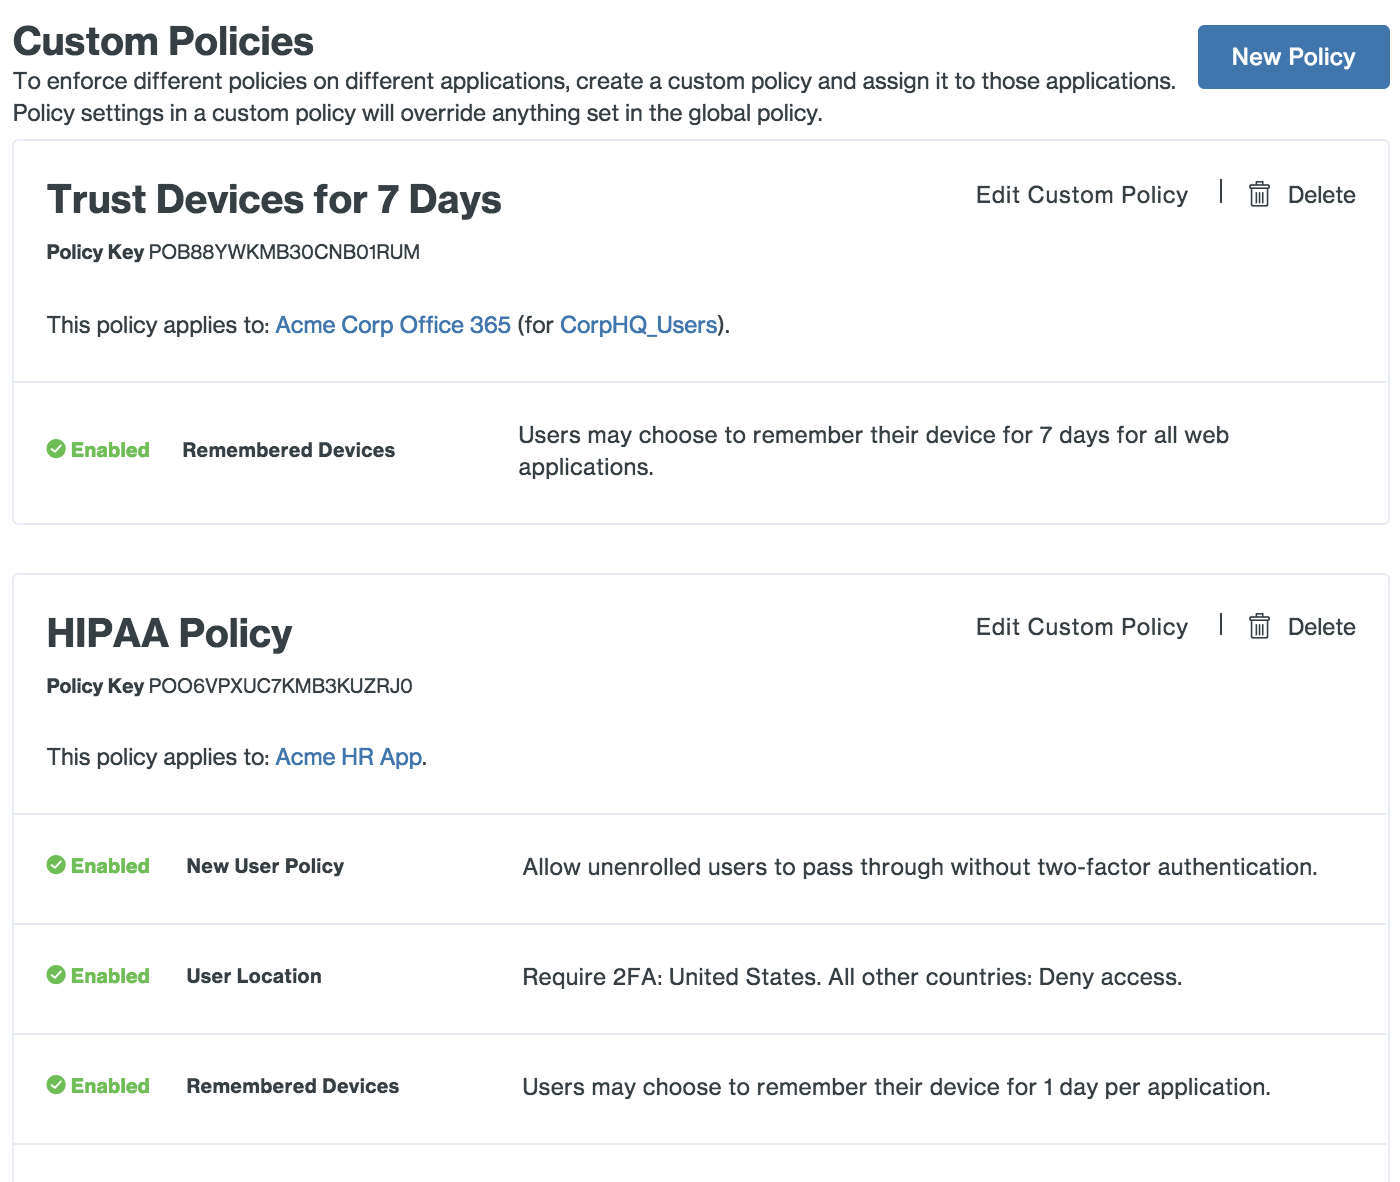 The Custom Policies screen; these override global policy. Headings on this page: Trust Devices for 7 Days & HIPAA Policy.